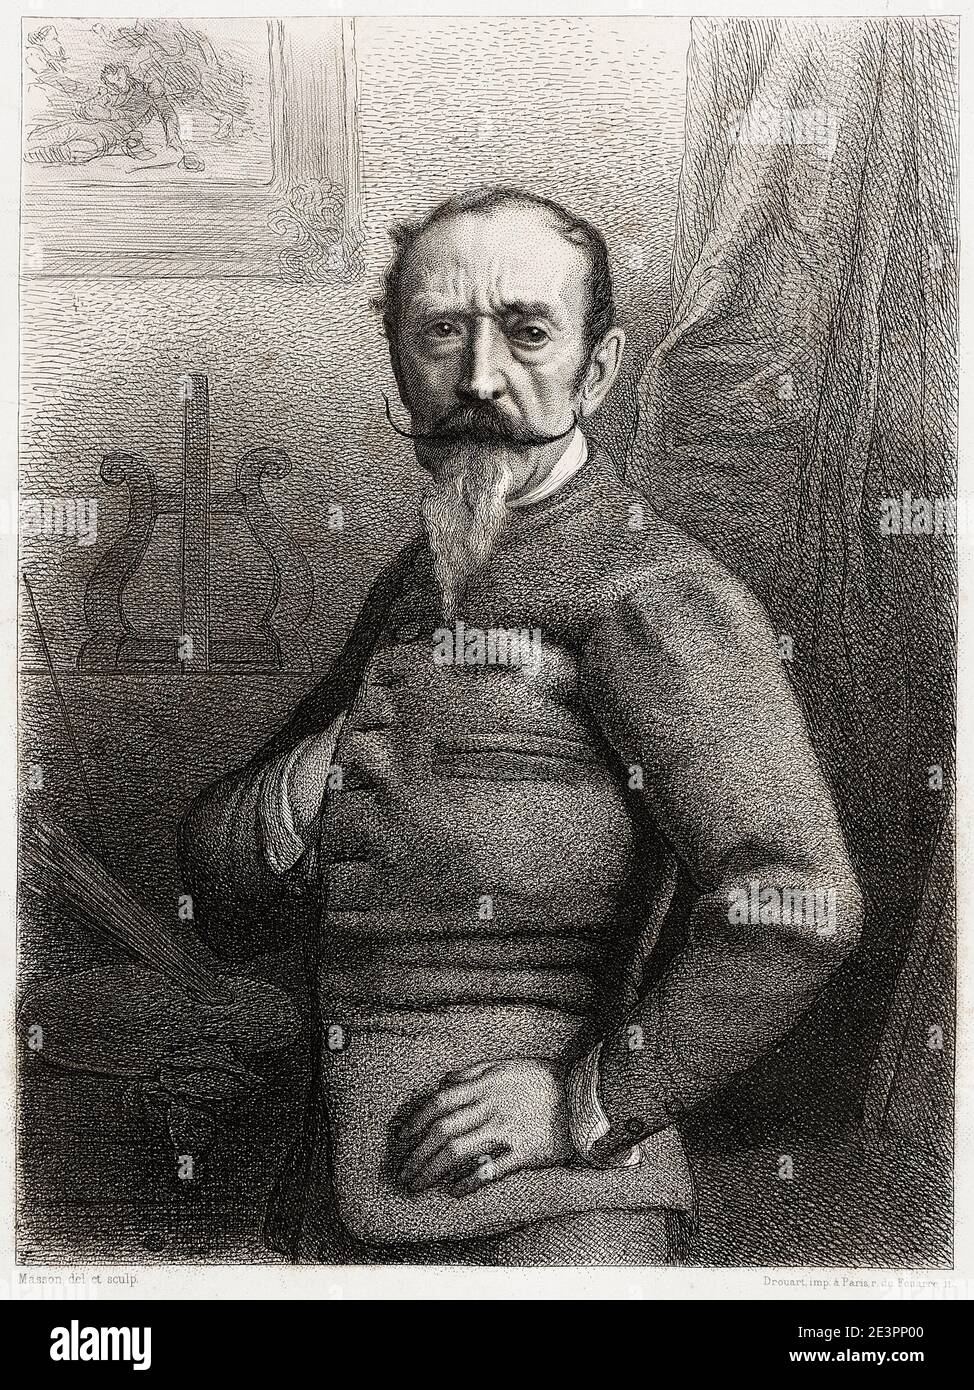 Émile Jean-Horace Vernet, (Horace Vernet) (1789-1863), pittore francese, ritratto di Alphonse-Charles Masson, 1857 Foto Stock